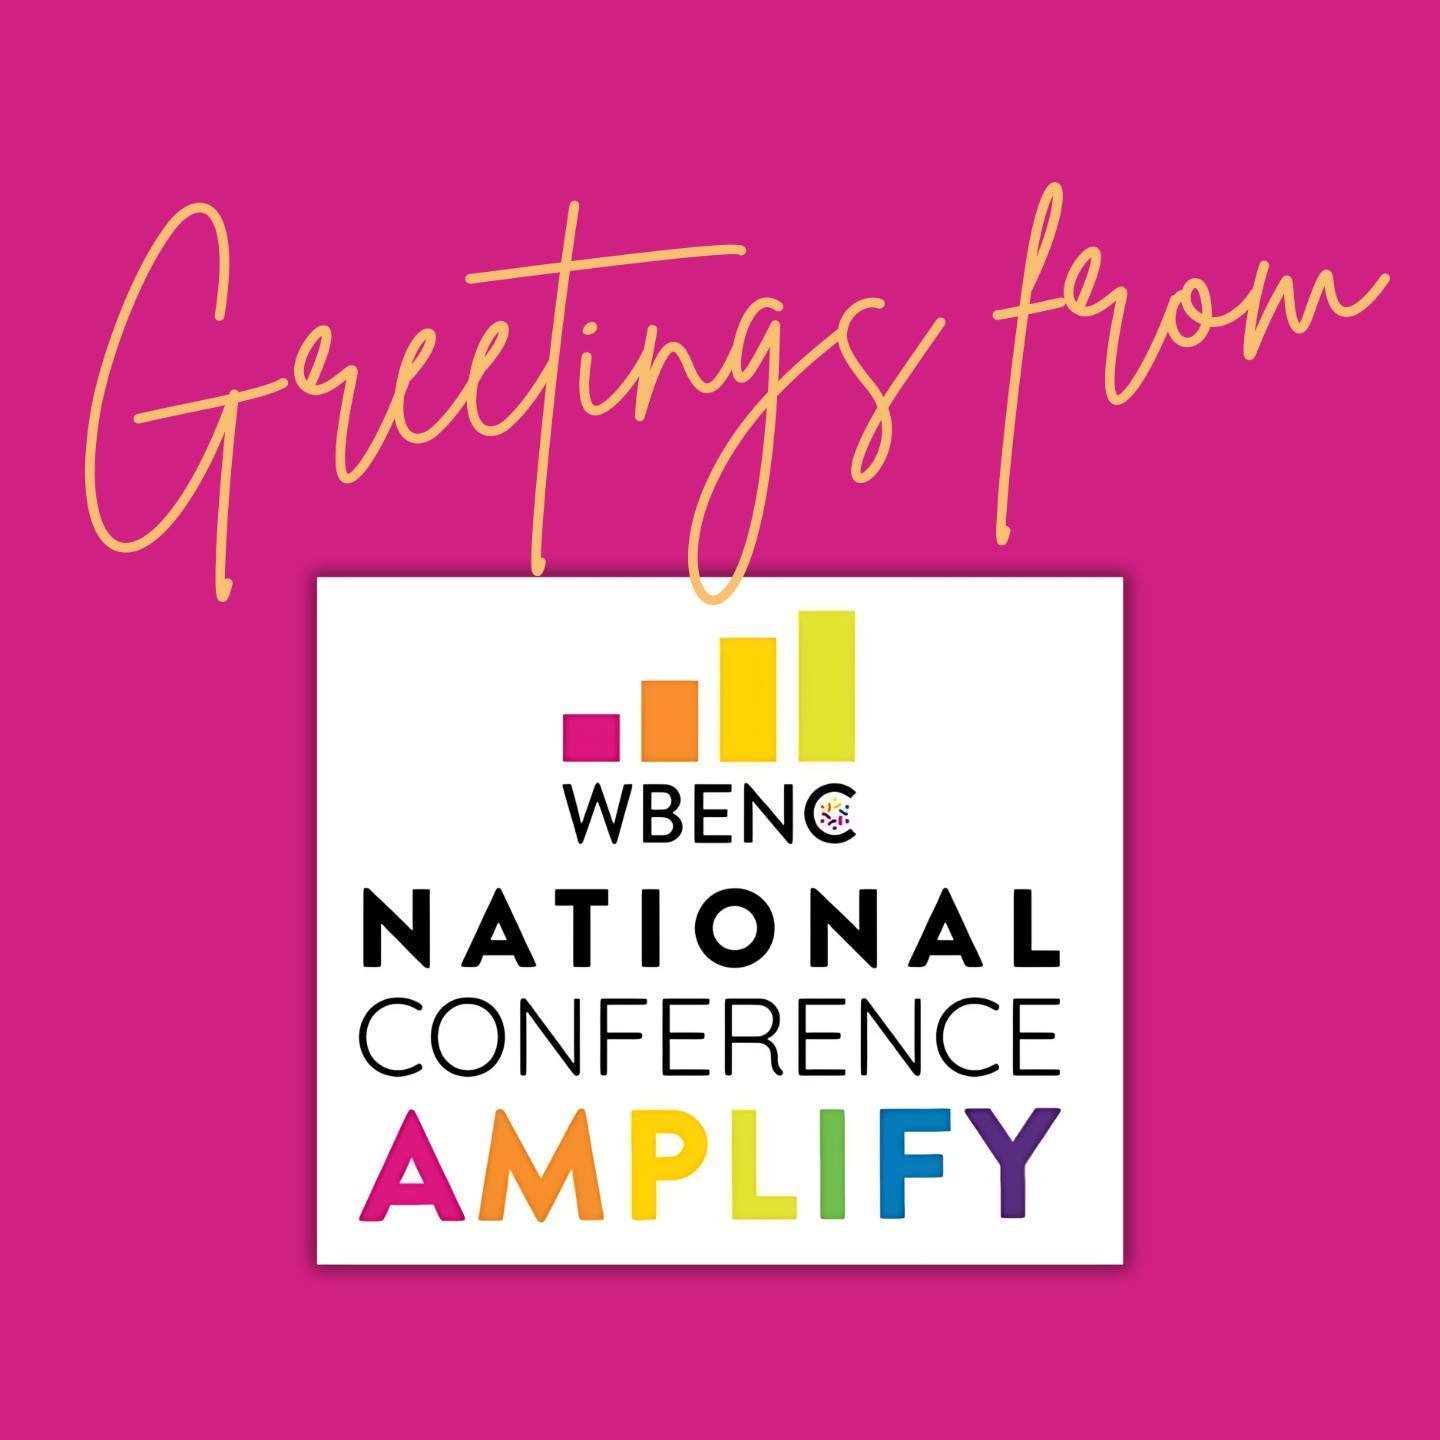 Still reflecting on the experience at this year's National WBENC Conference! 🌟
From reconnecting with familiar faces and sharing laughs, to meeting inspiring women who could benefit from our packaging expertise&mdash;every moment was enriching.
📌 I